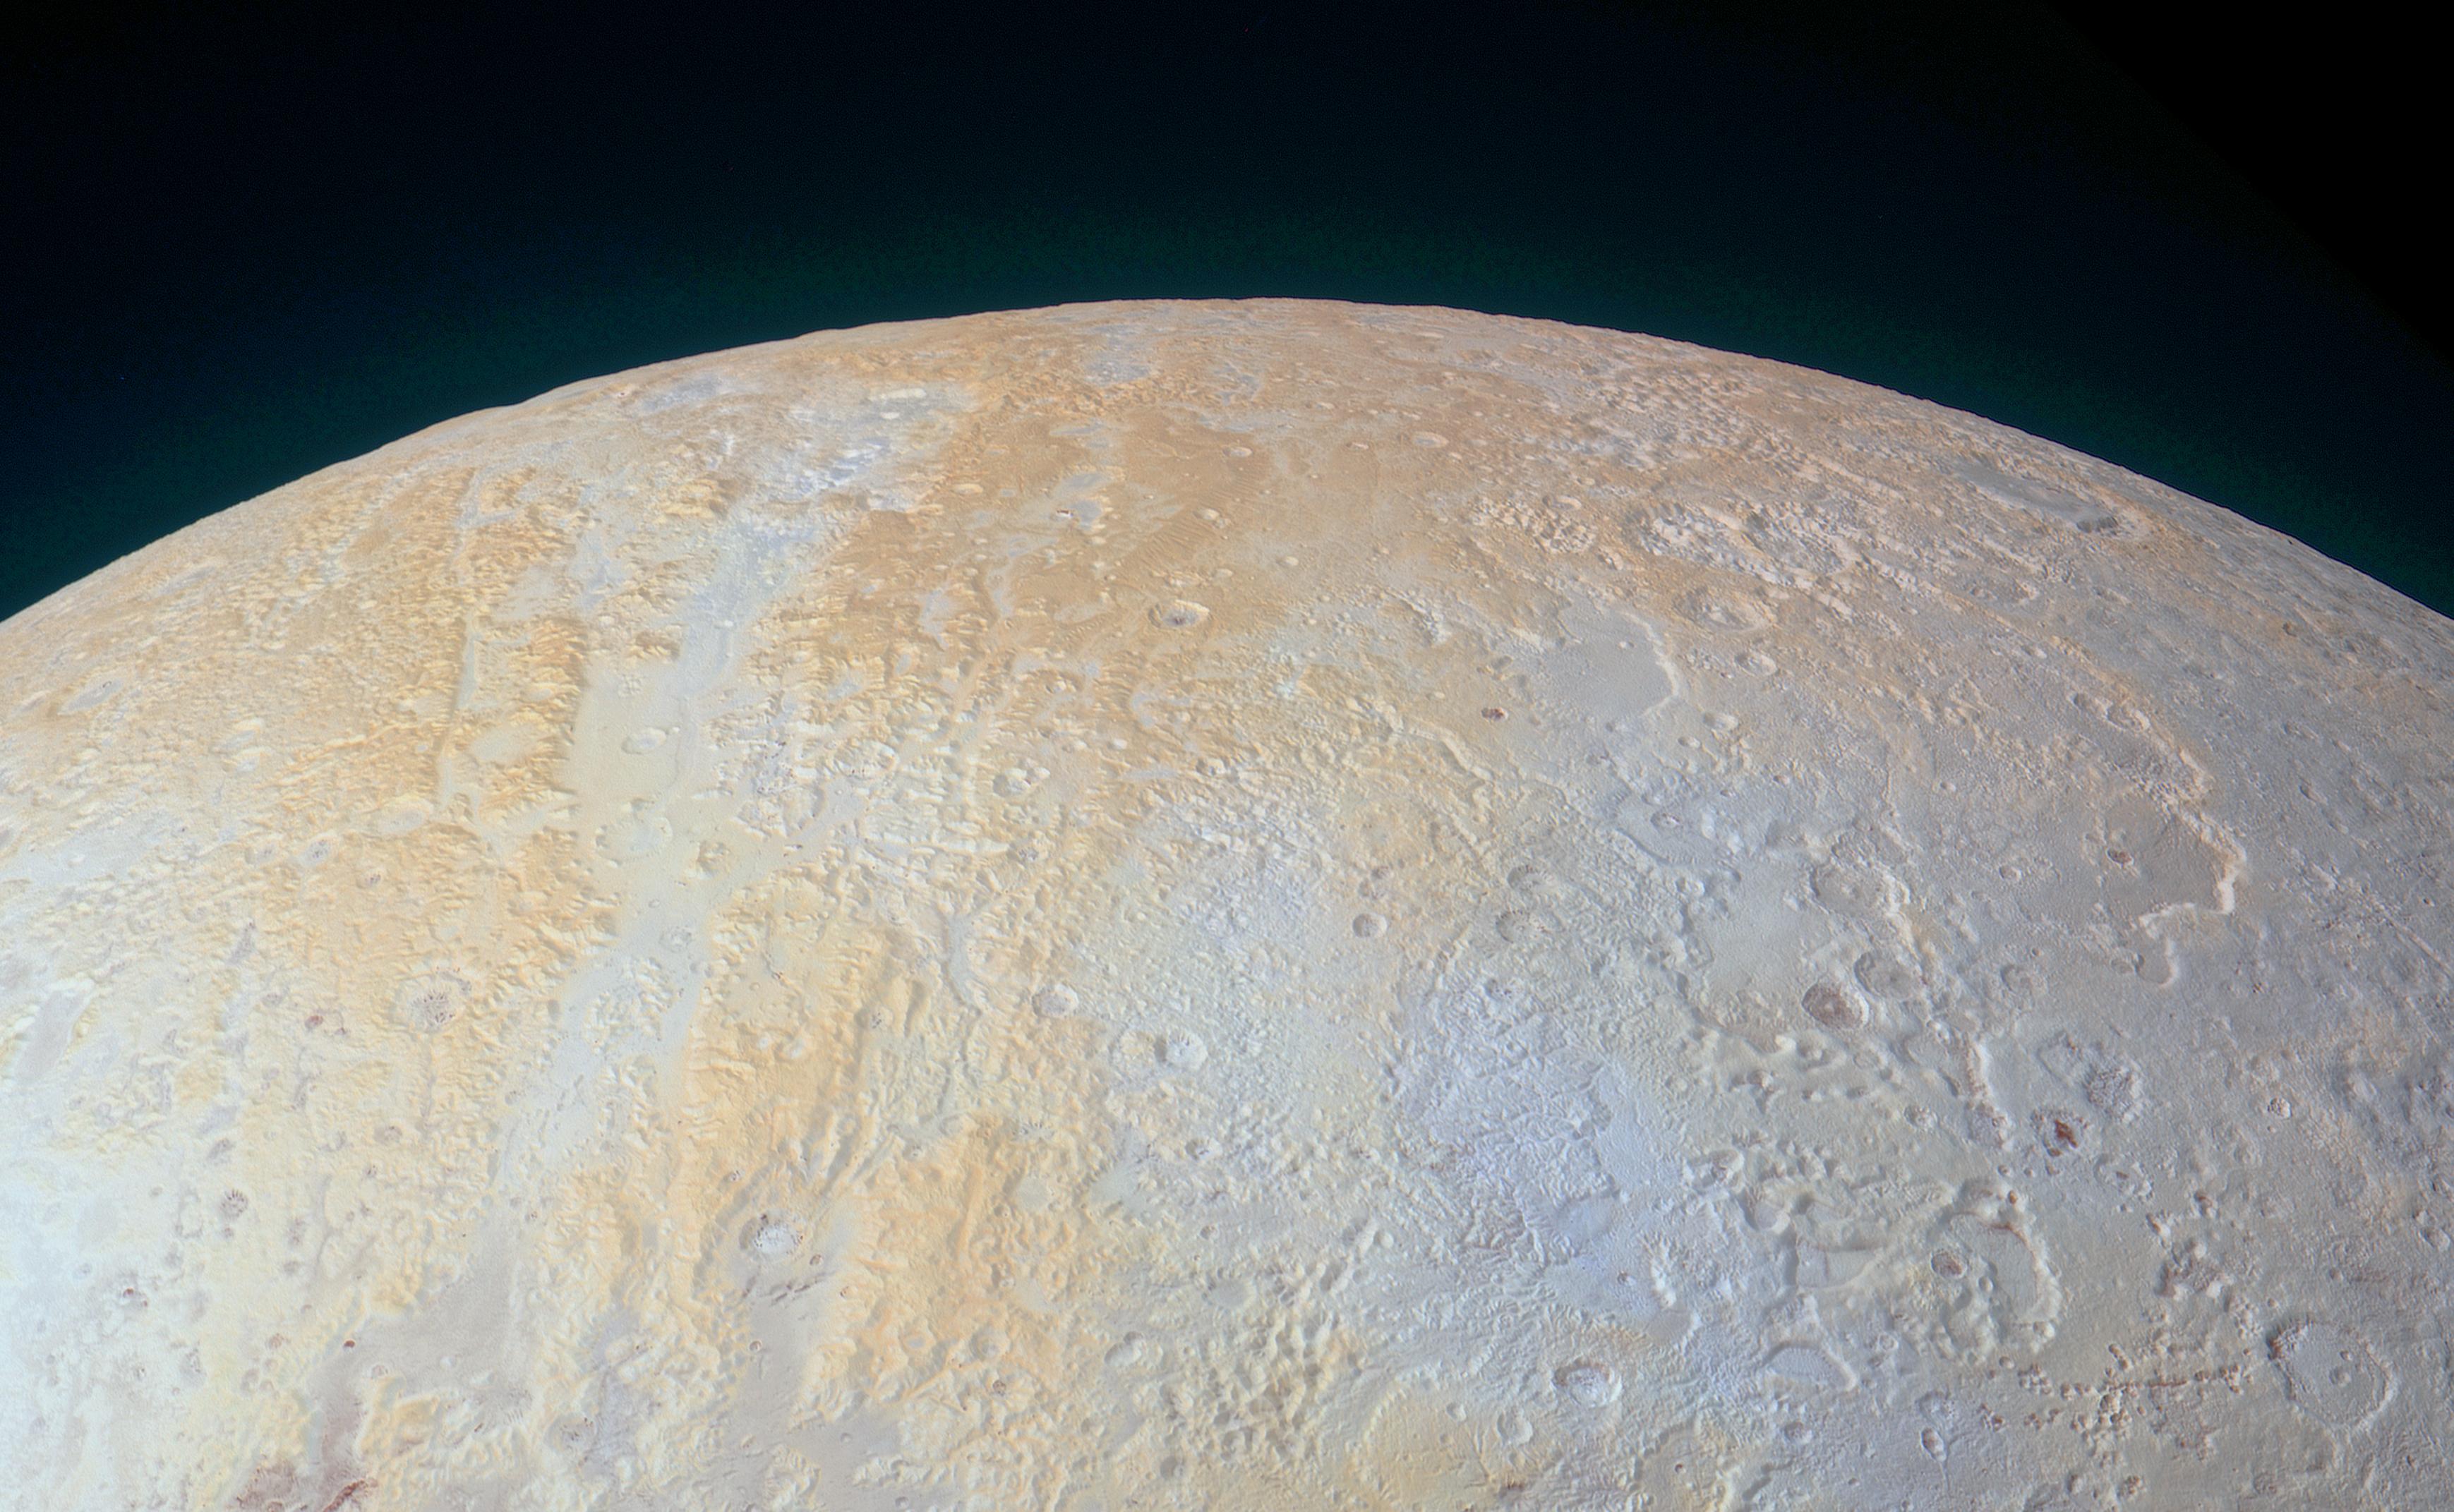 This ethereal scene captured by NASA's New Horizons spacecraft tells yet another story of Pluto's diversity of geological and compositional features -- this time in an enhanced color image of the north polar area.